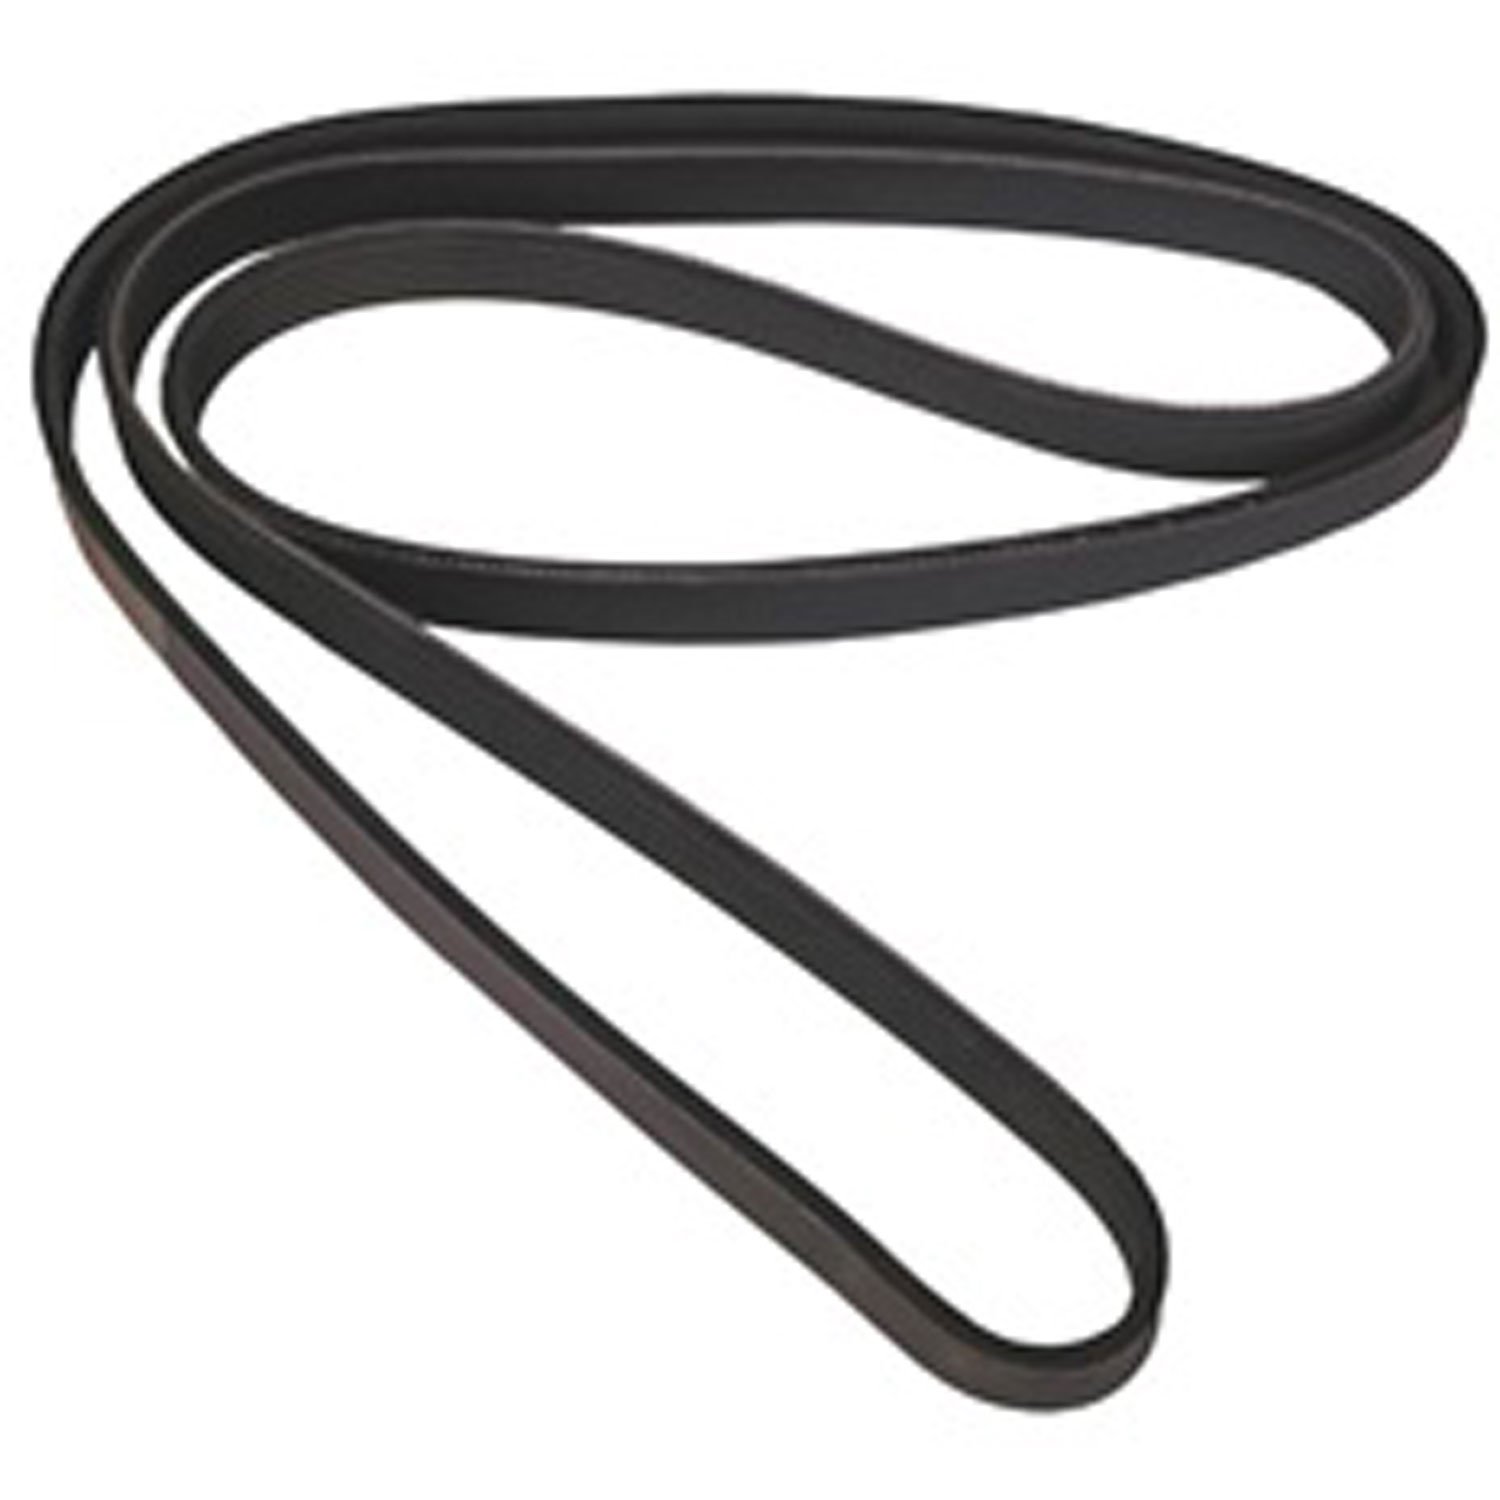 Stock replacement serpentine belt from Omix-ADA, Fits 99-04